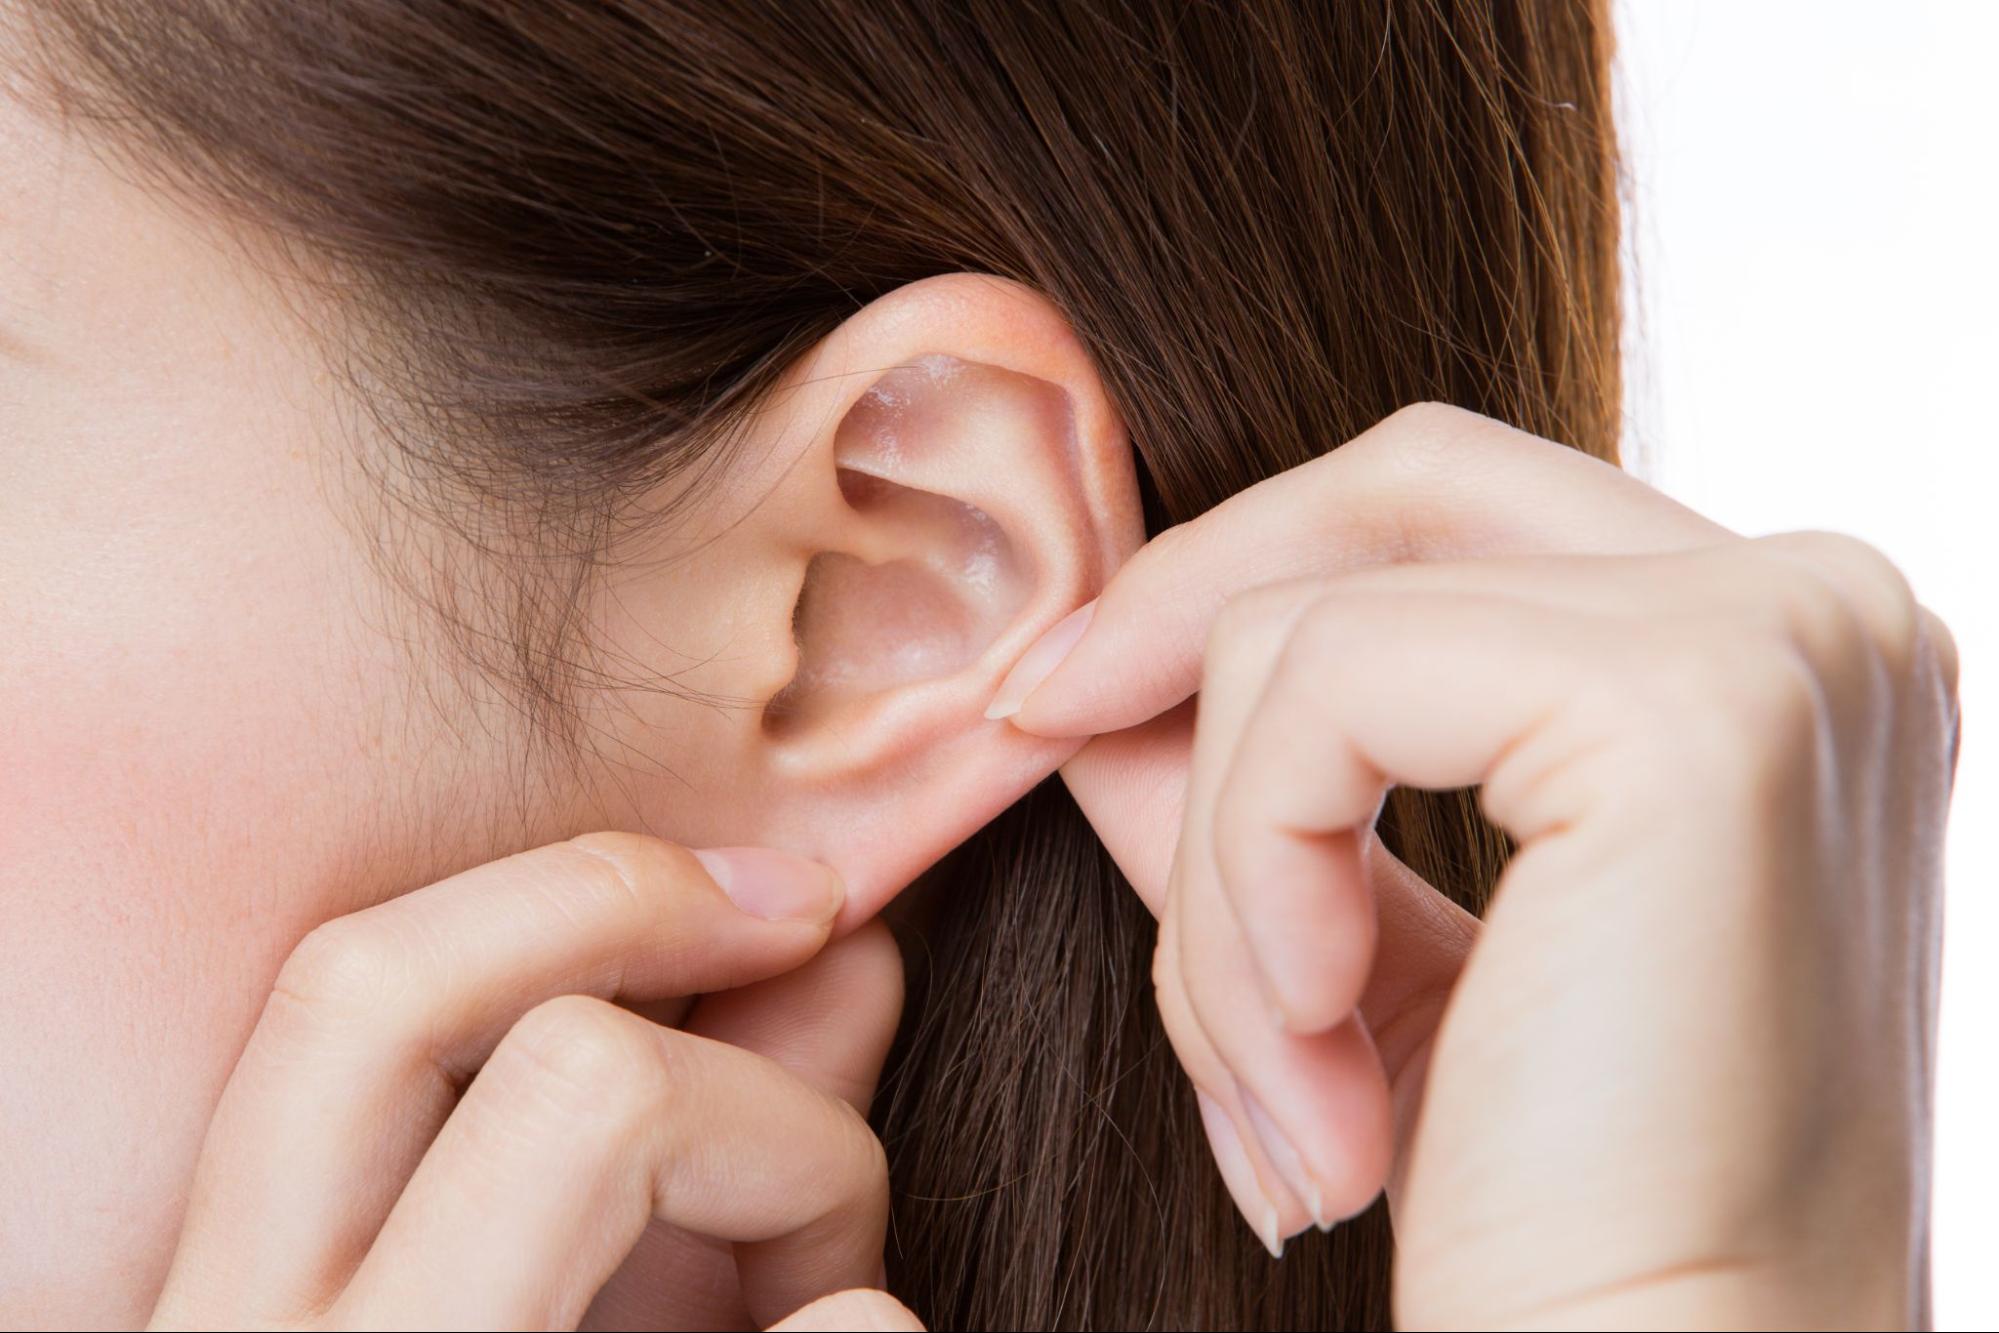 how to clean your ears: Close up shot of a woman holding her ear with her fingers